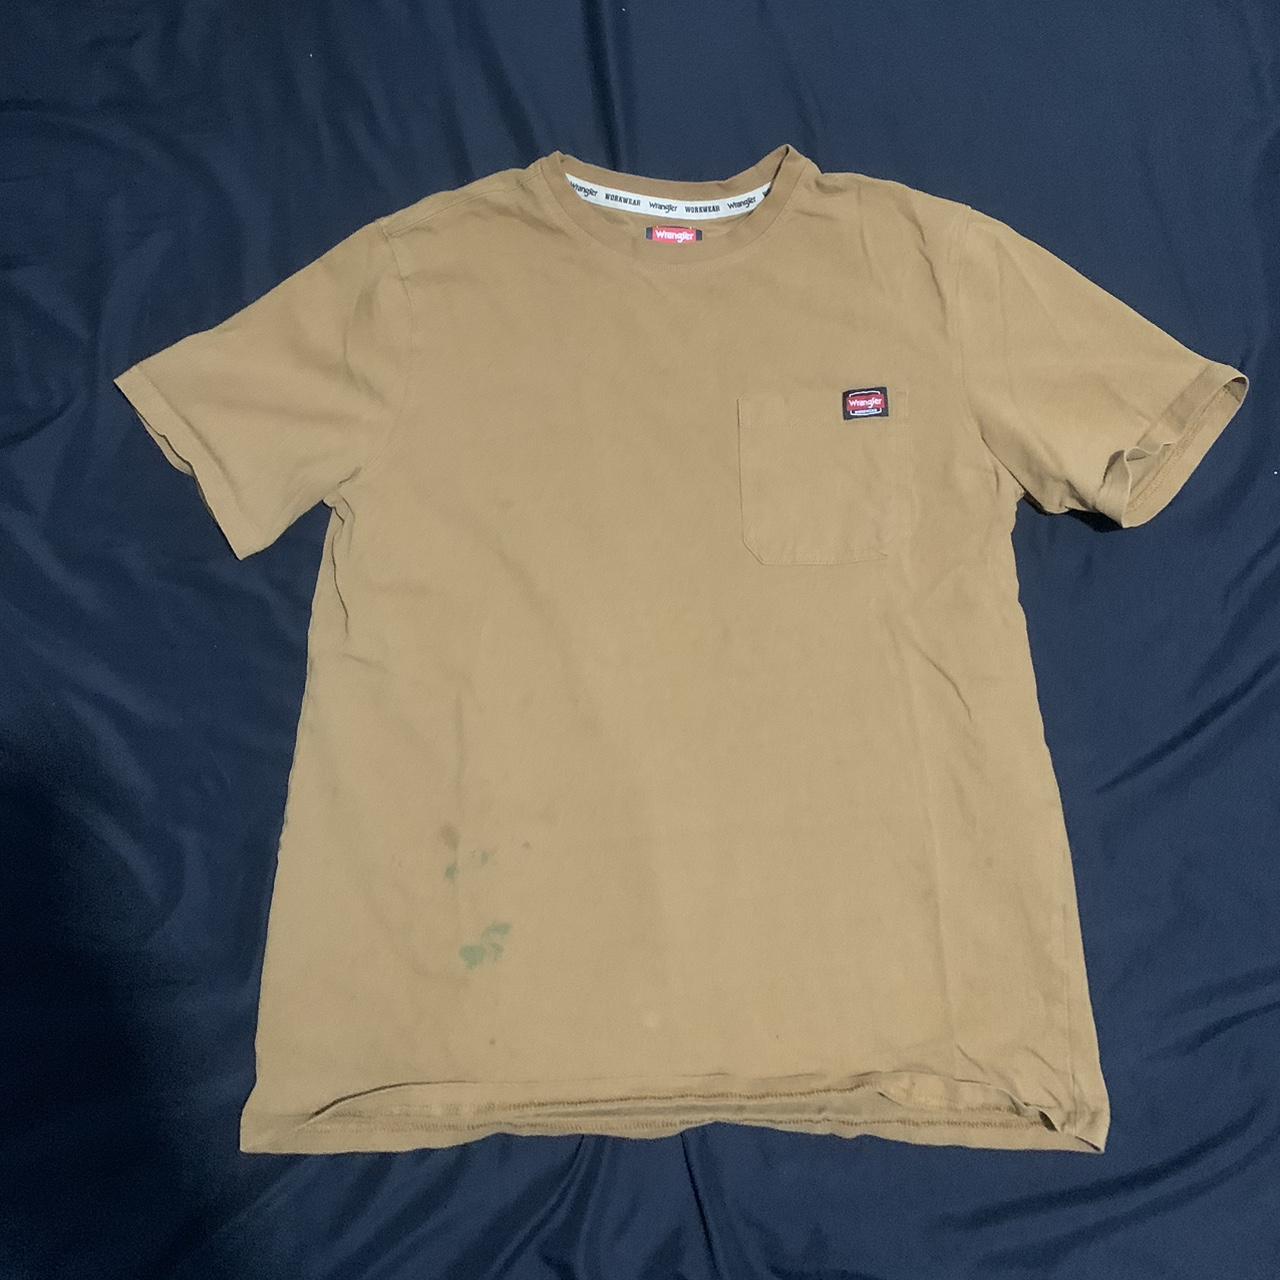 item listed by pablosxanz